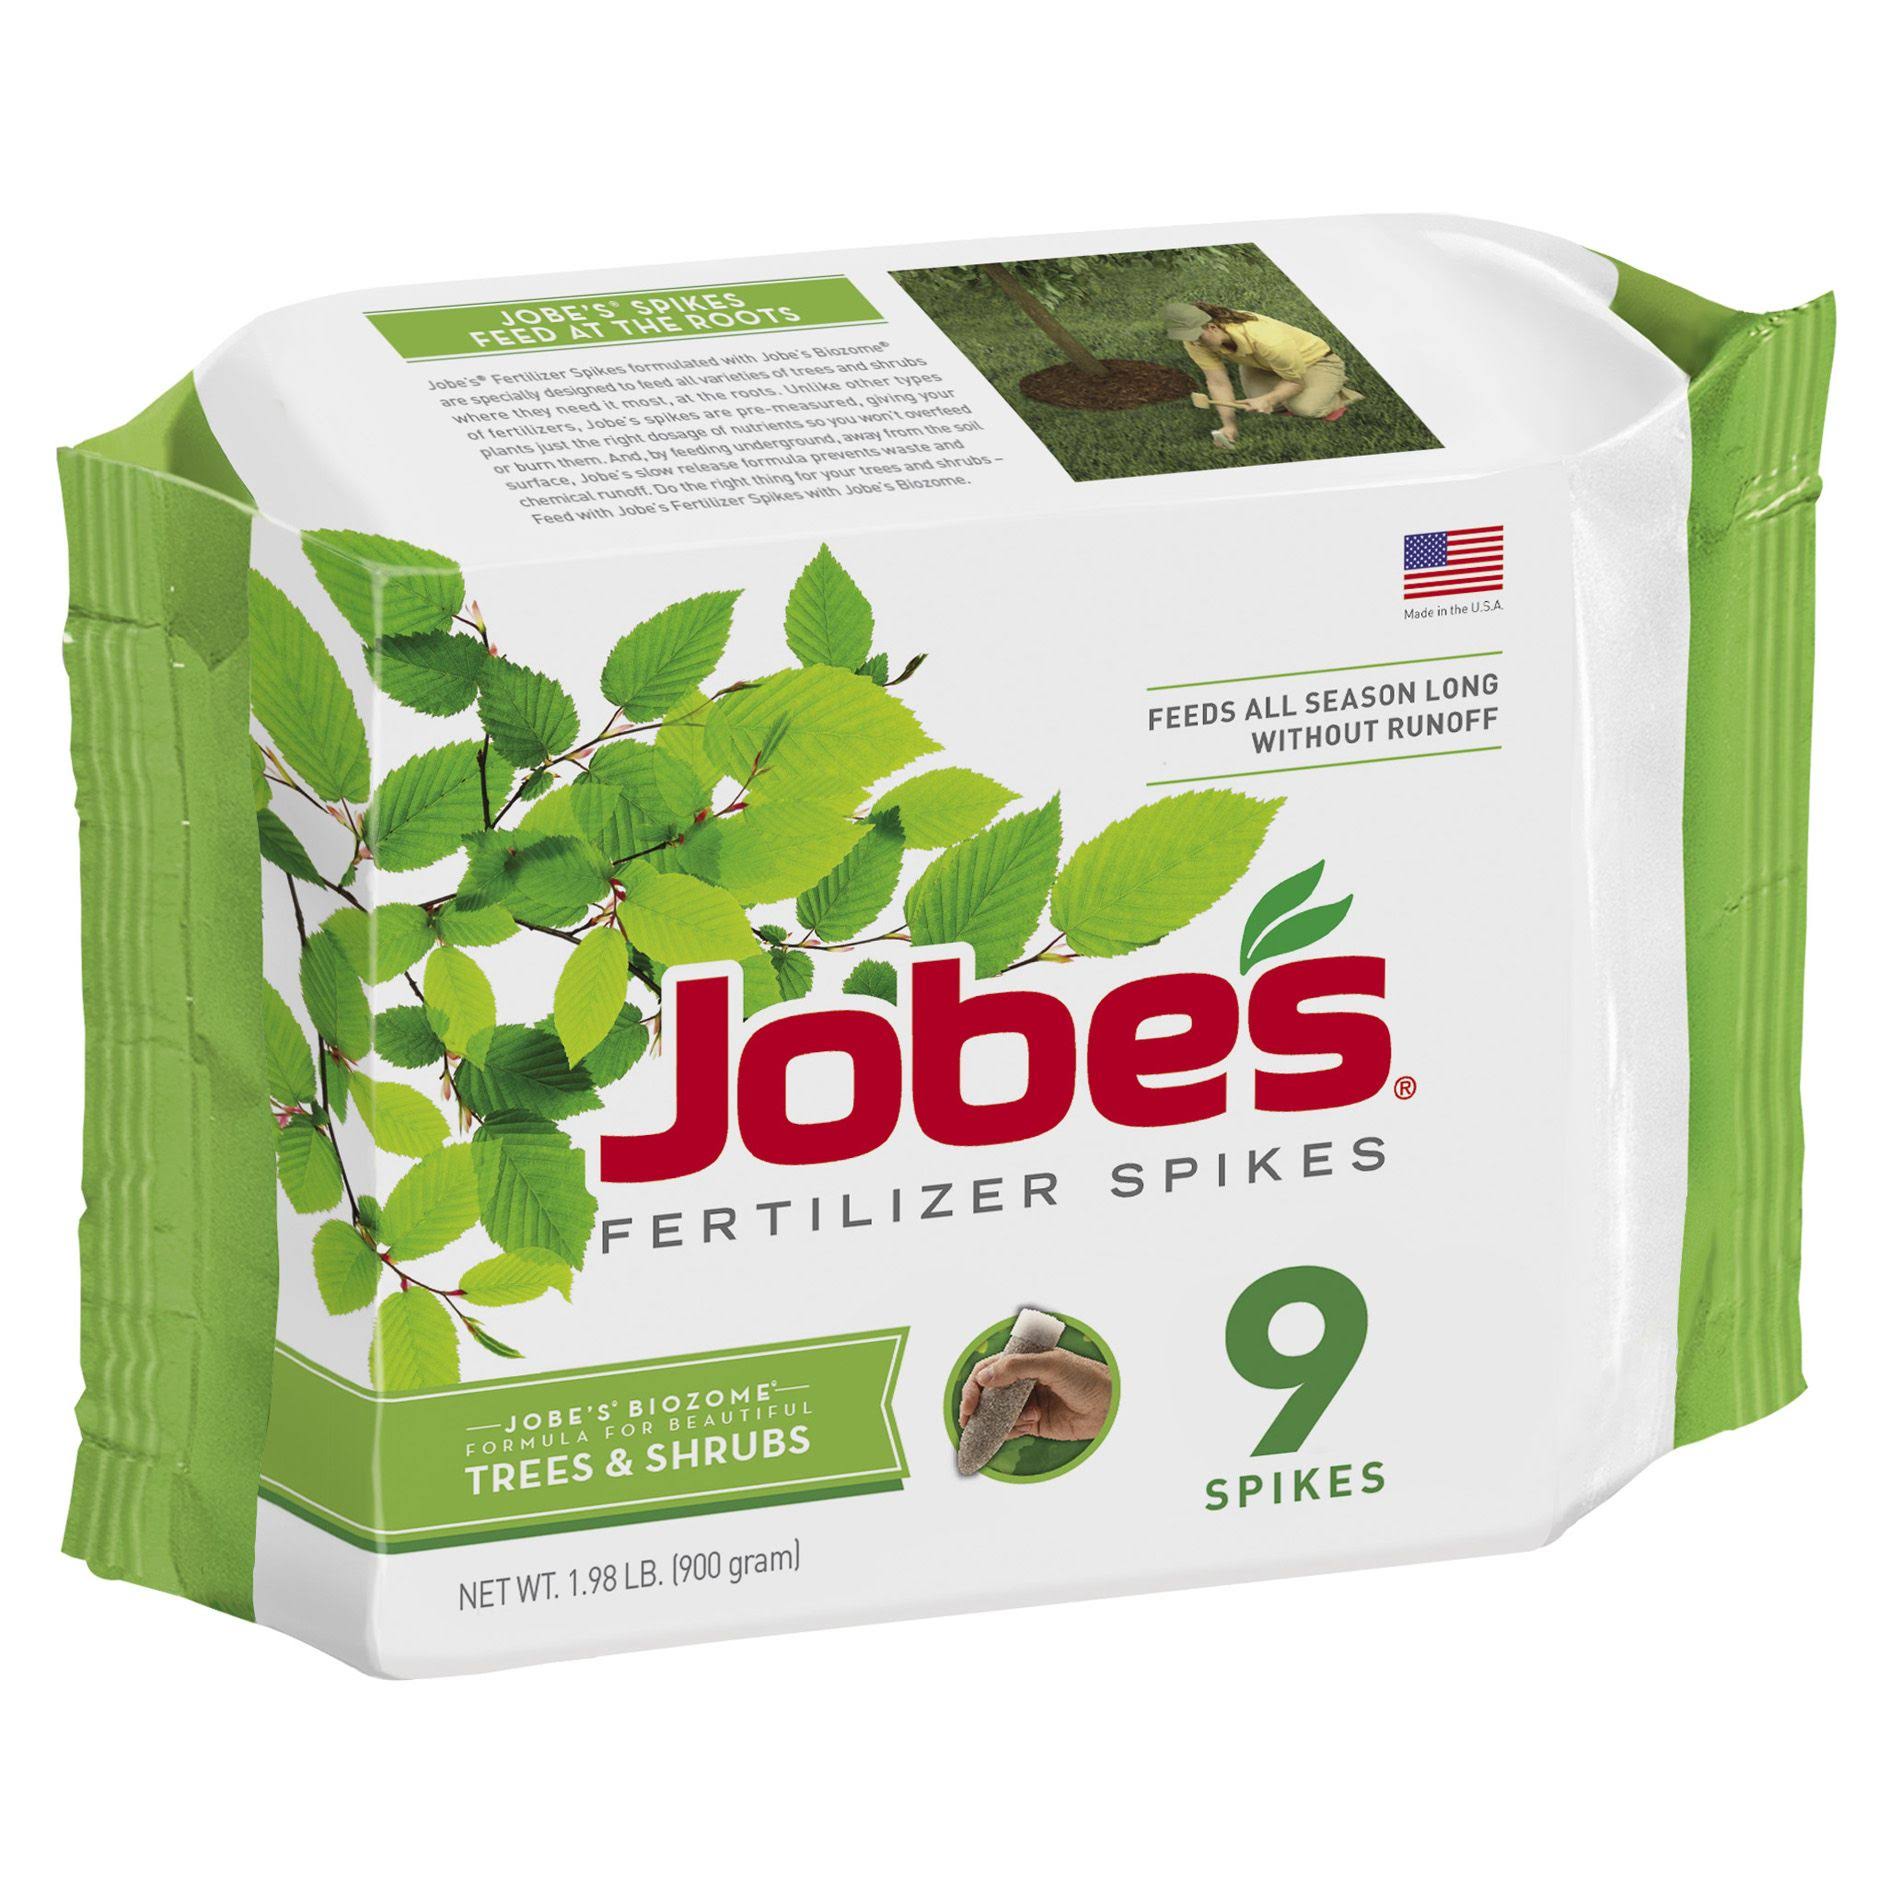 Jobe's Trees and Shrubs Fertilizer Spikes - 9ct